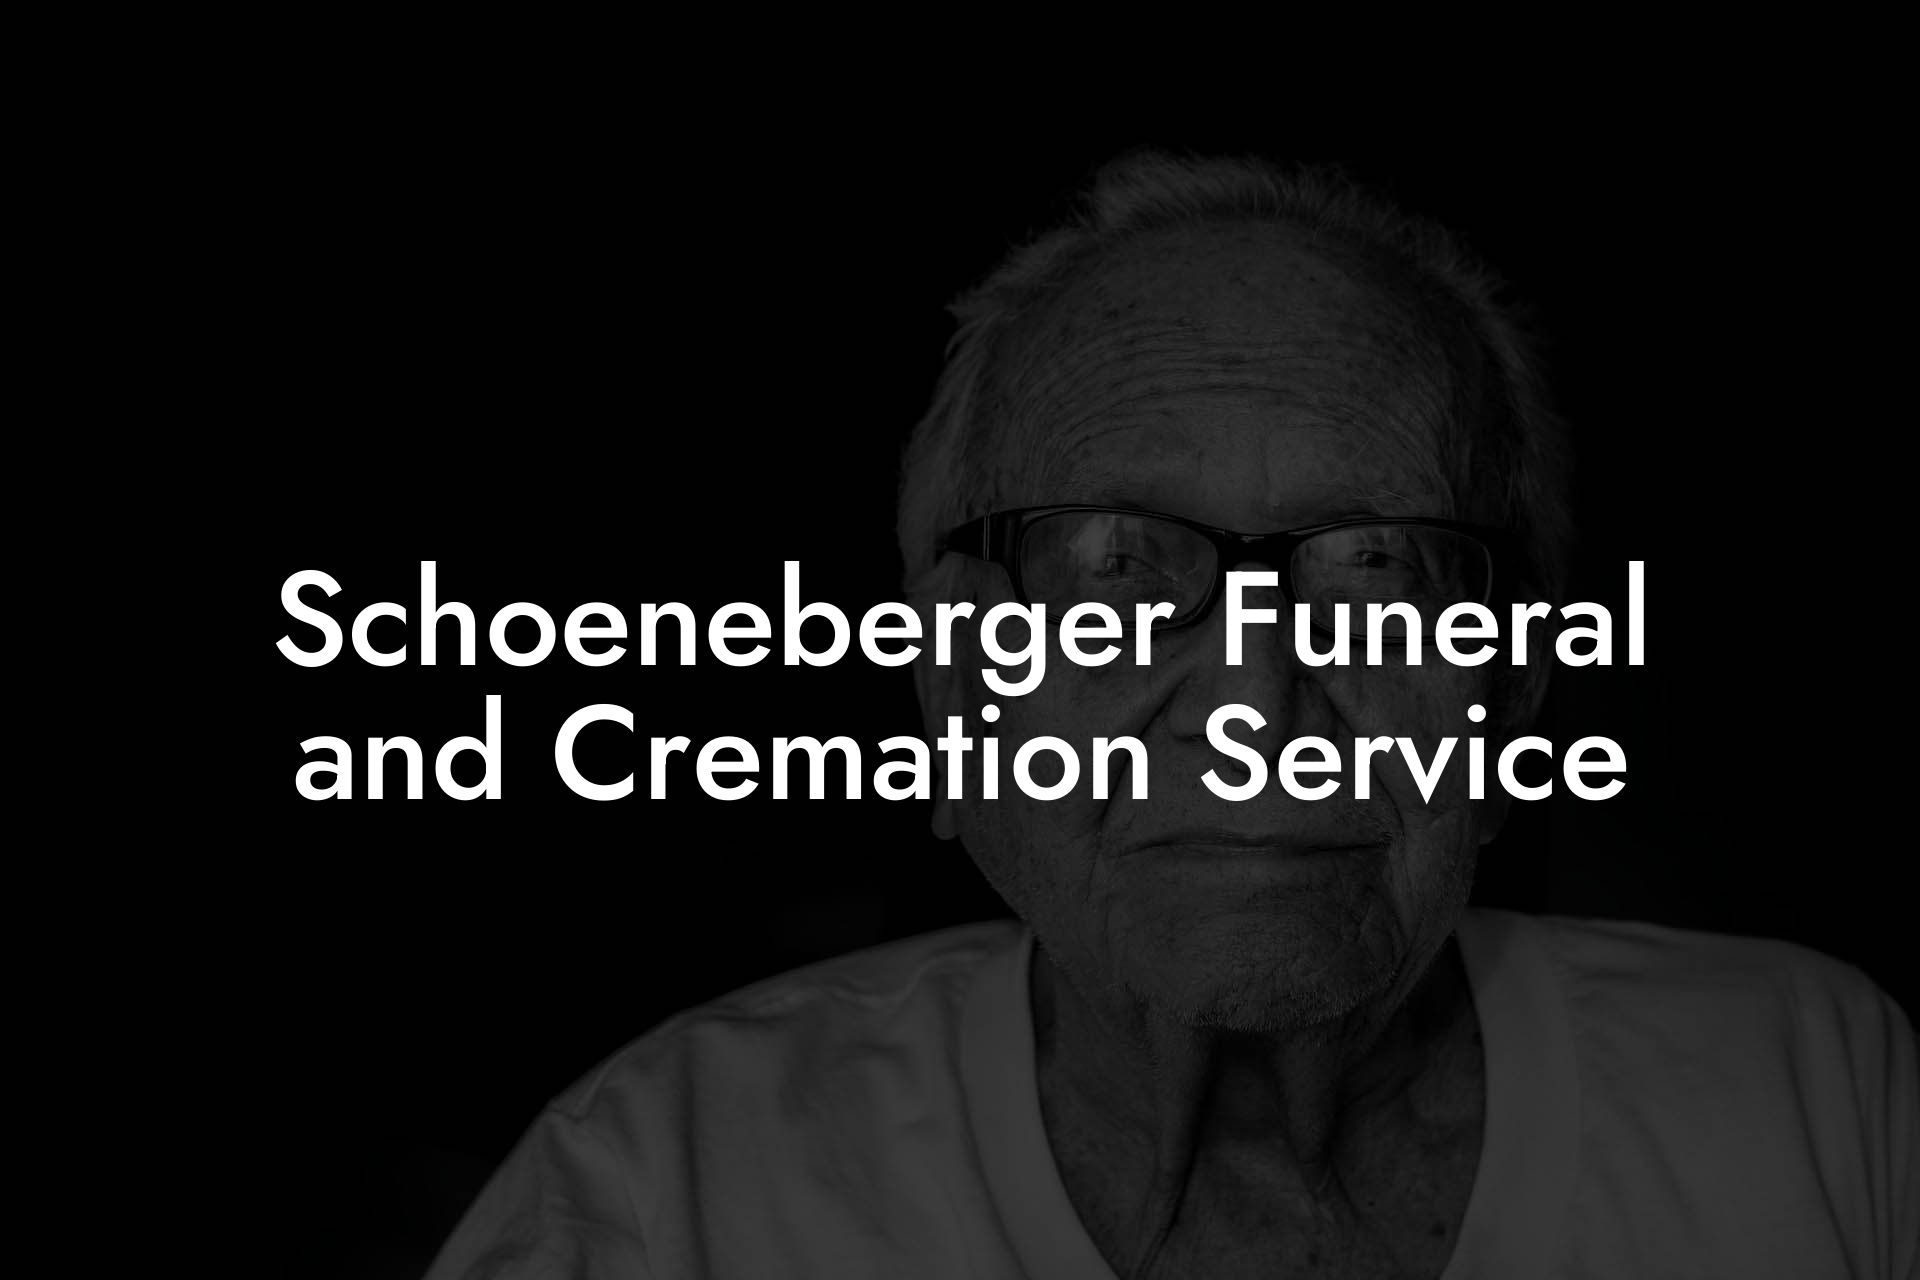 Schoeneberger Funeral and Cremation Service Eulogy Assistant